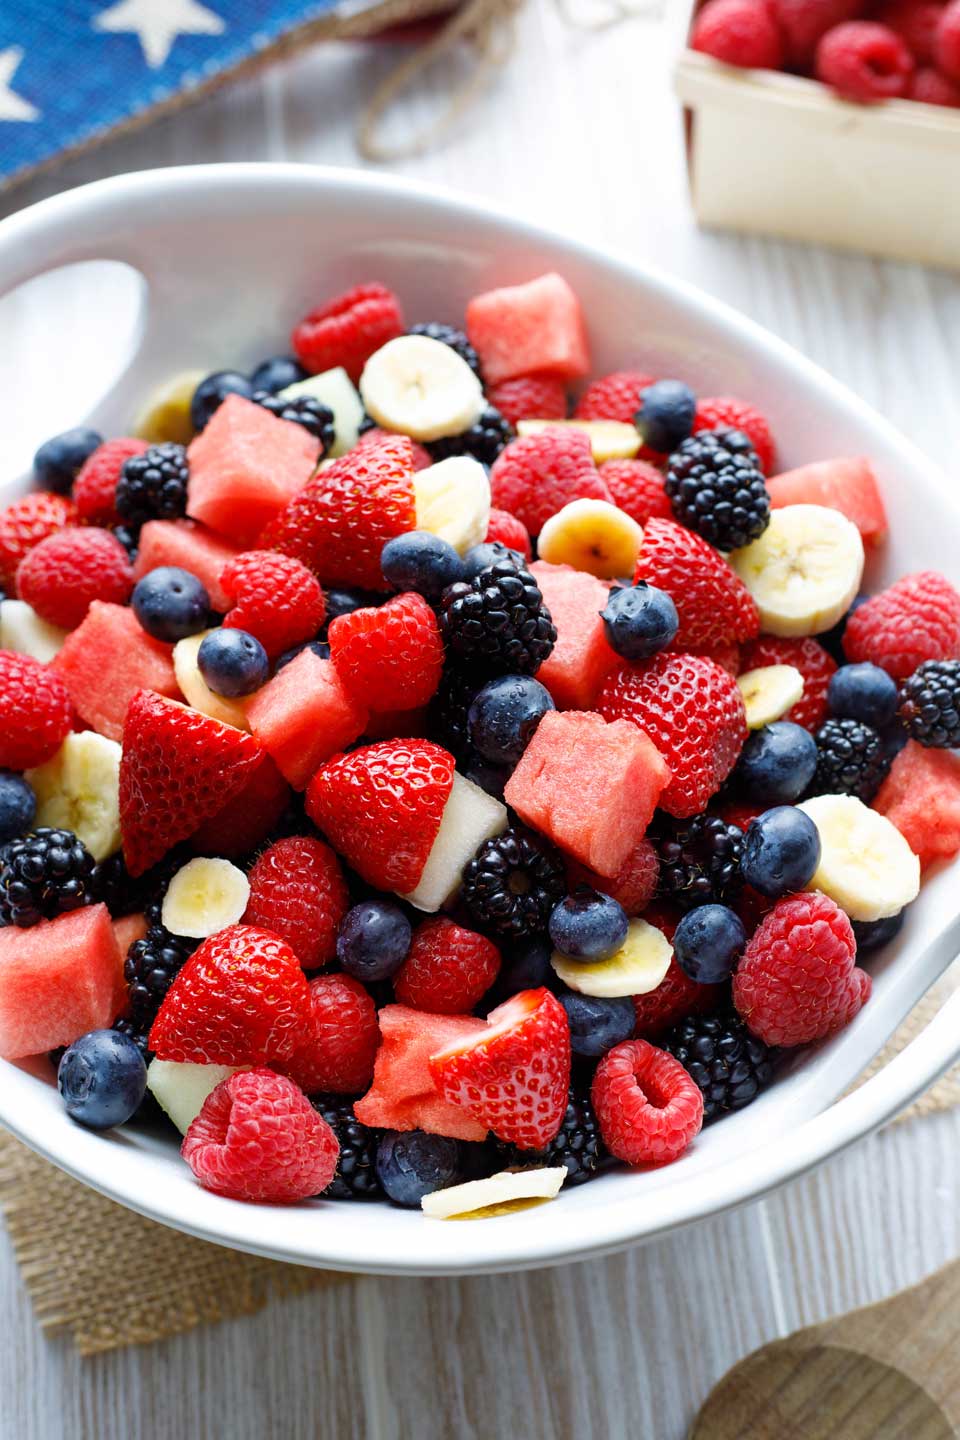 Large bowl filled with a mixture of red, white and blue fruits to show the easiest option for making a patriotic fruit salad